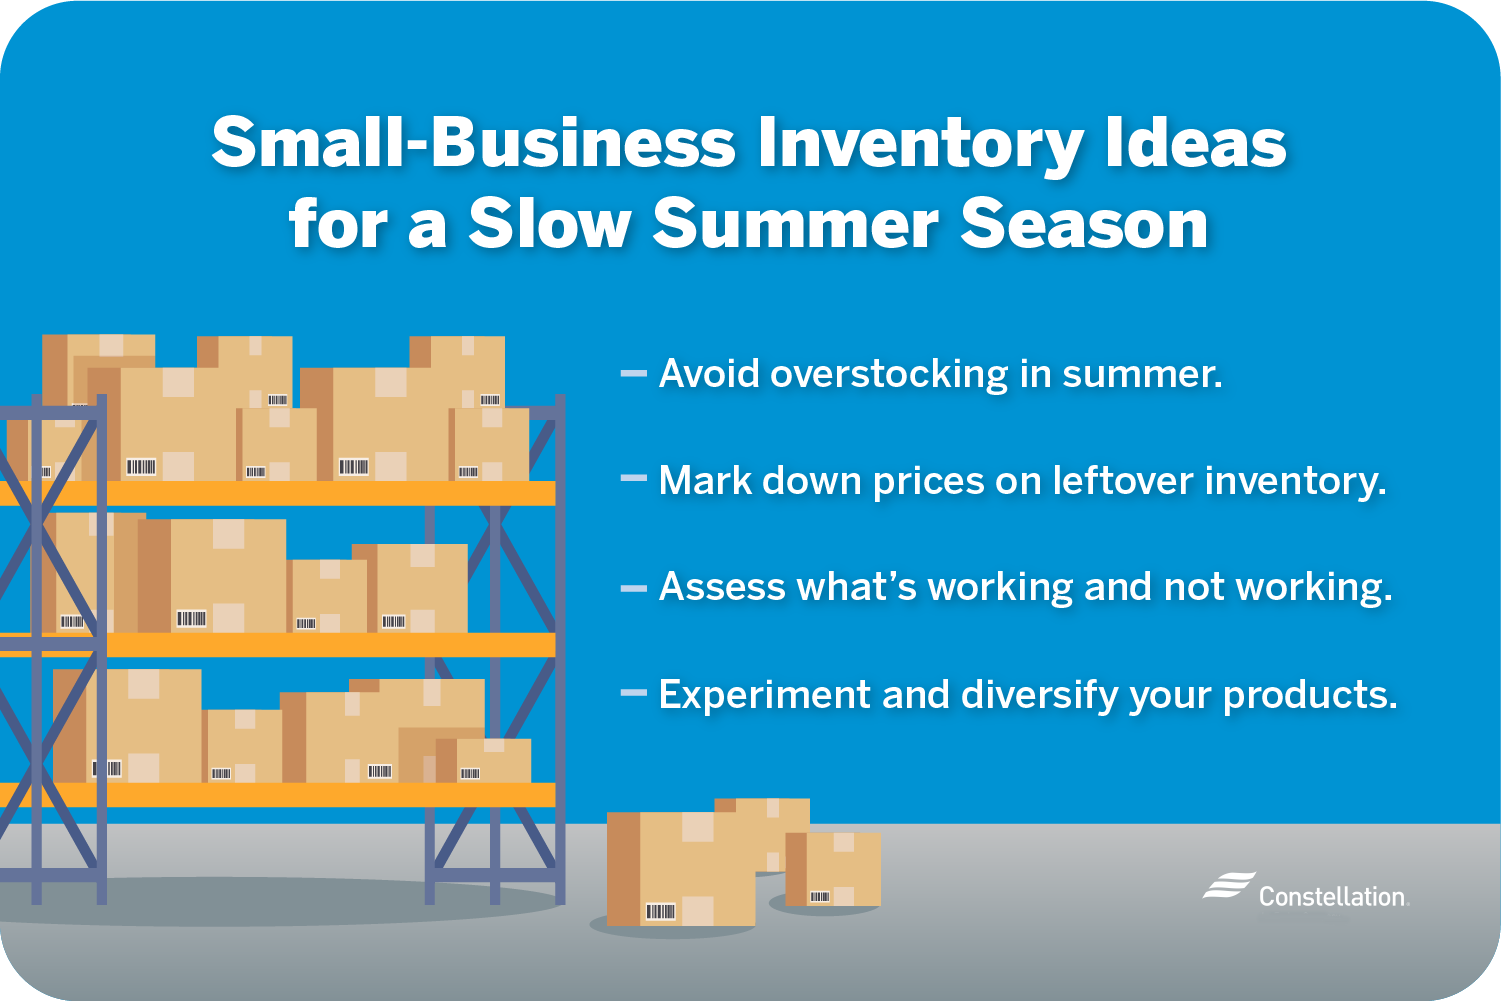 How your small business can handle inventory if summer is your slow season